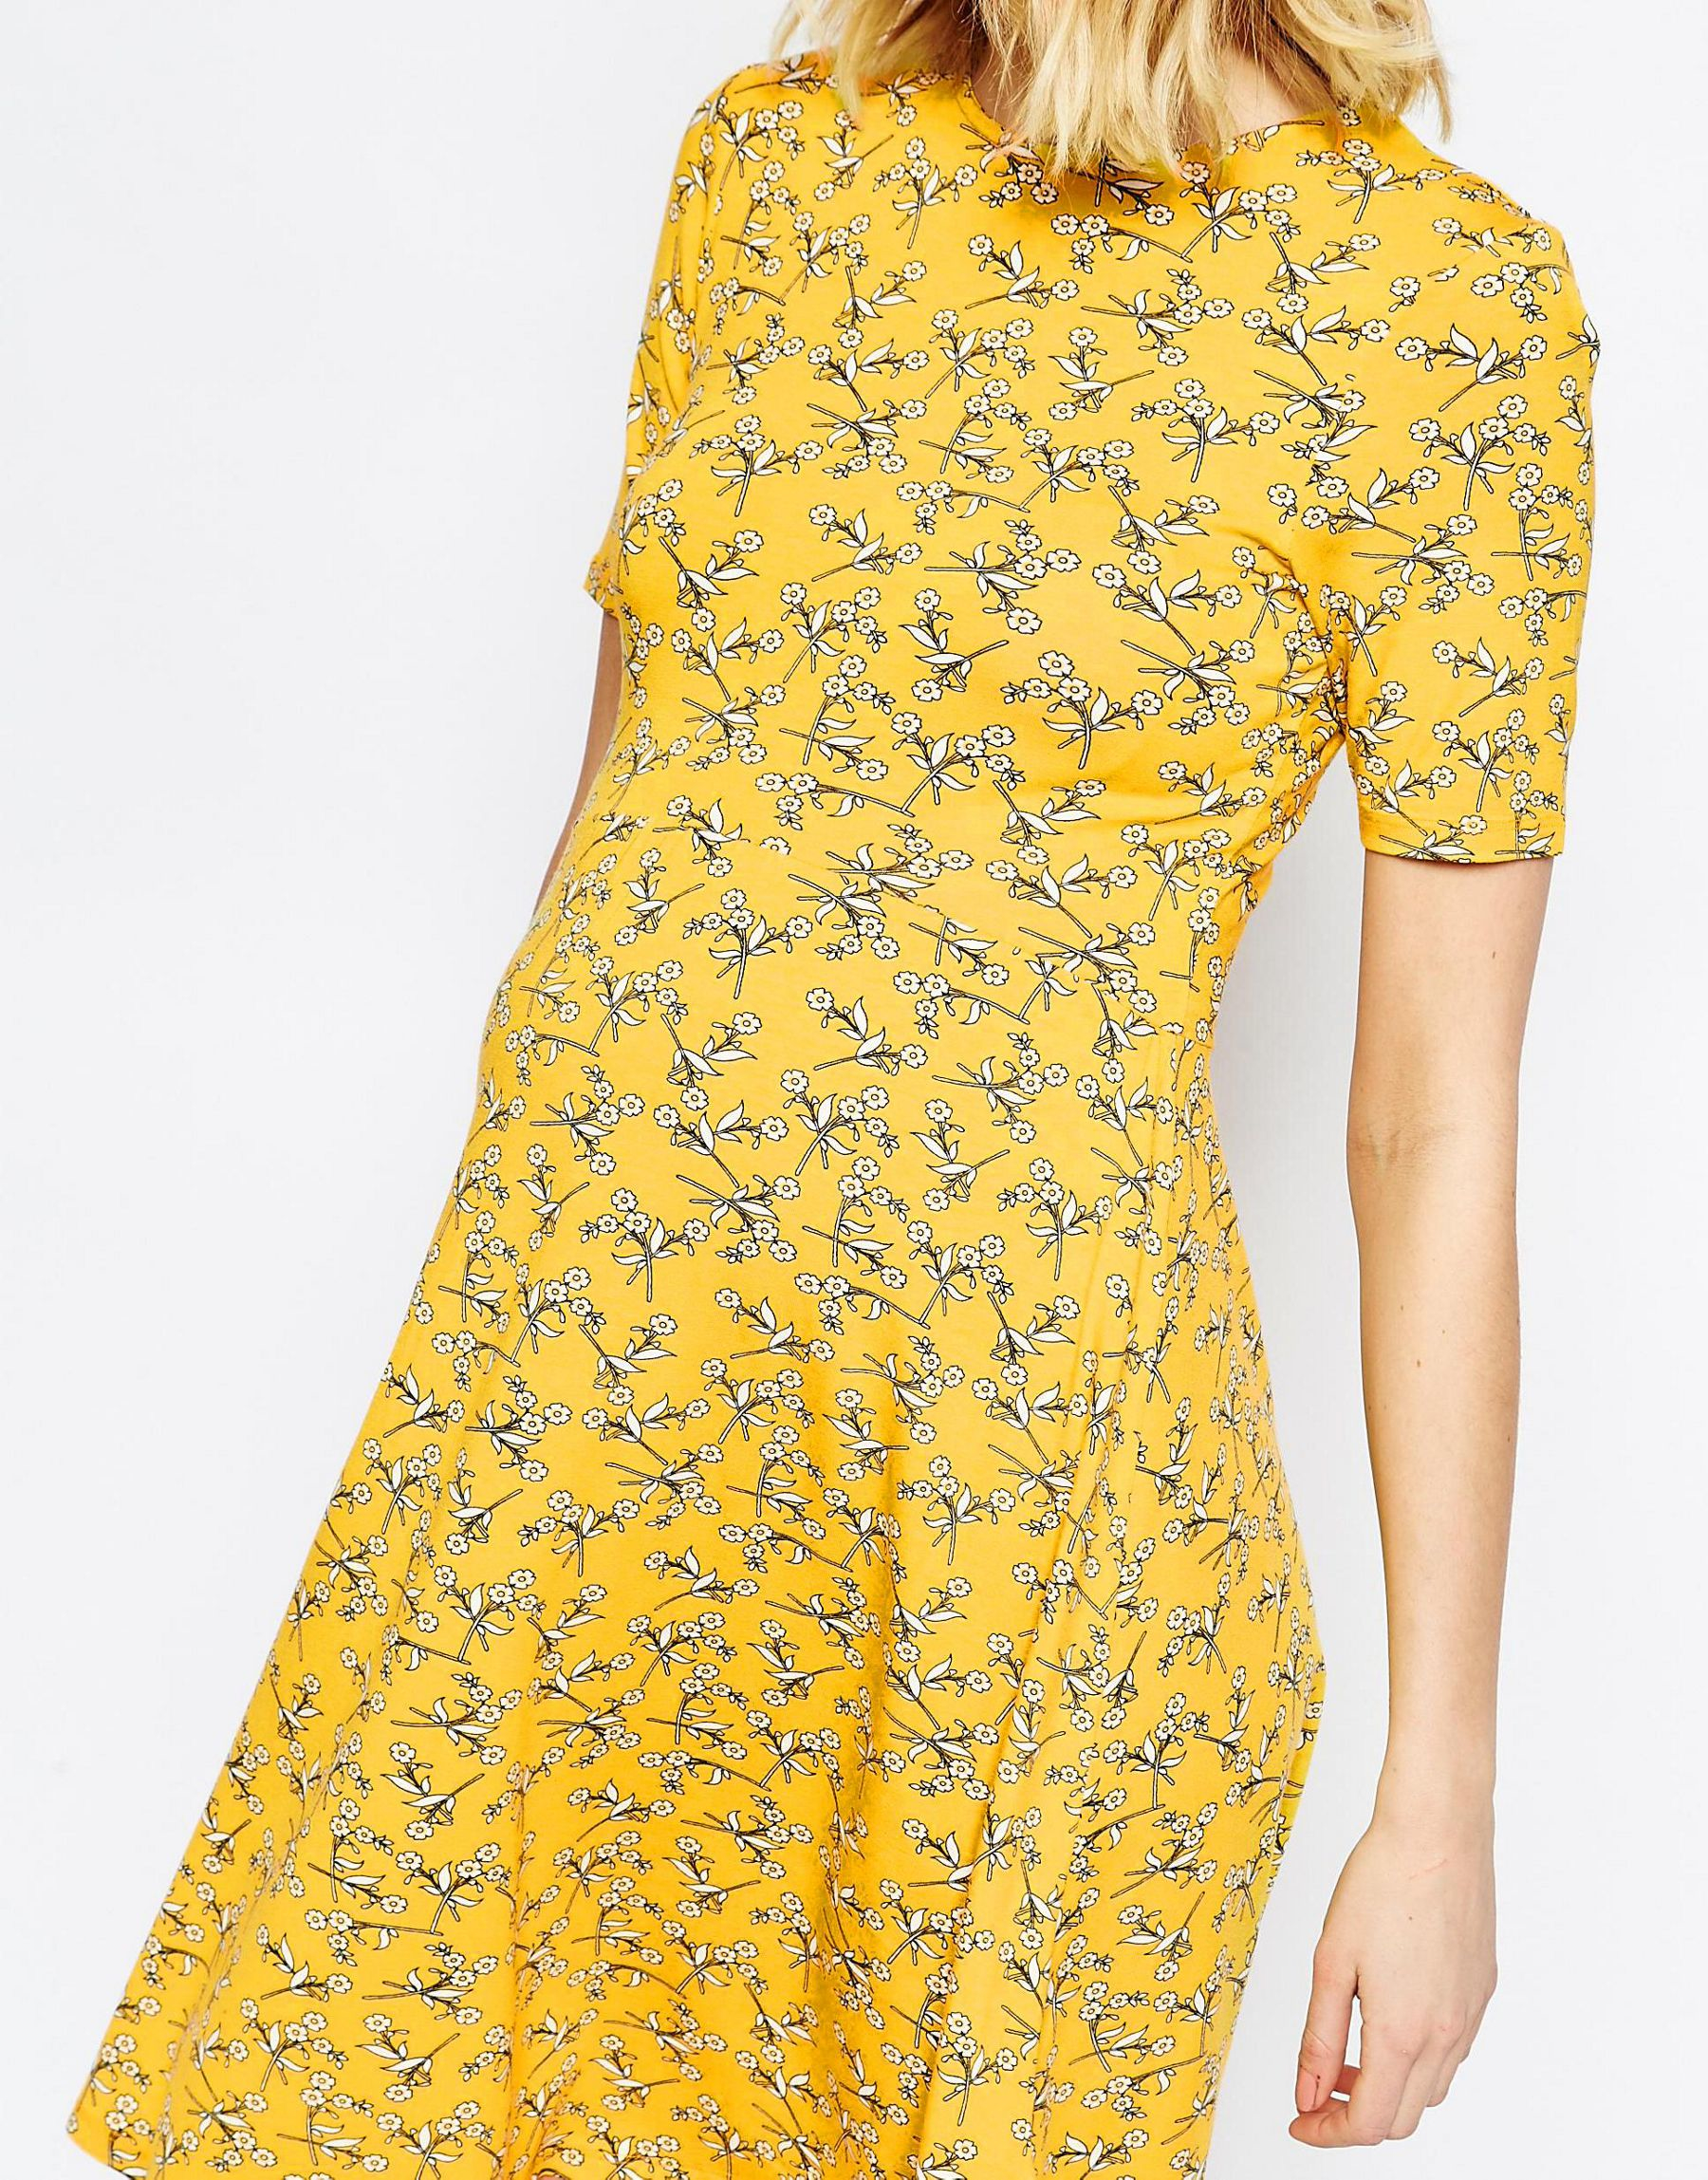 Asos Skater Dress In Chartreuse Floral Print In Multicolor Lyst